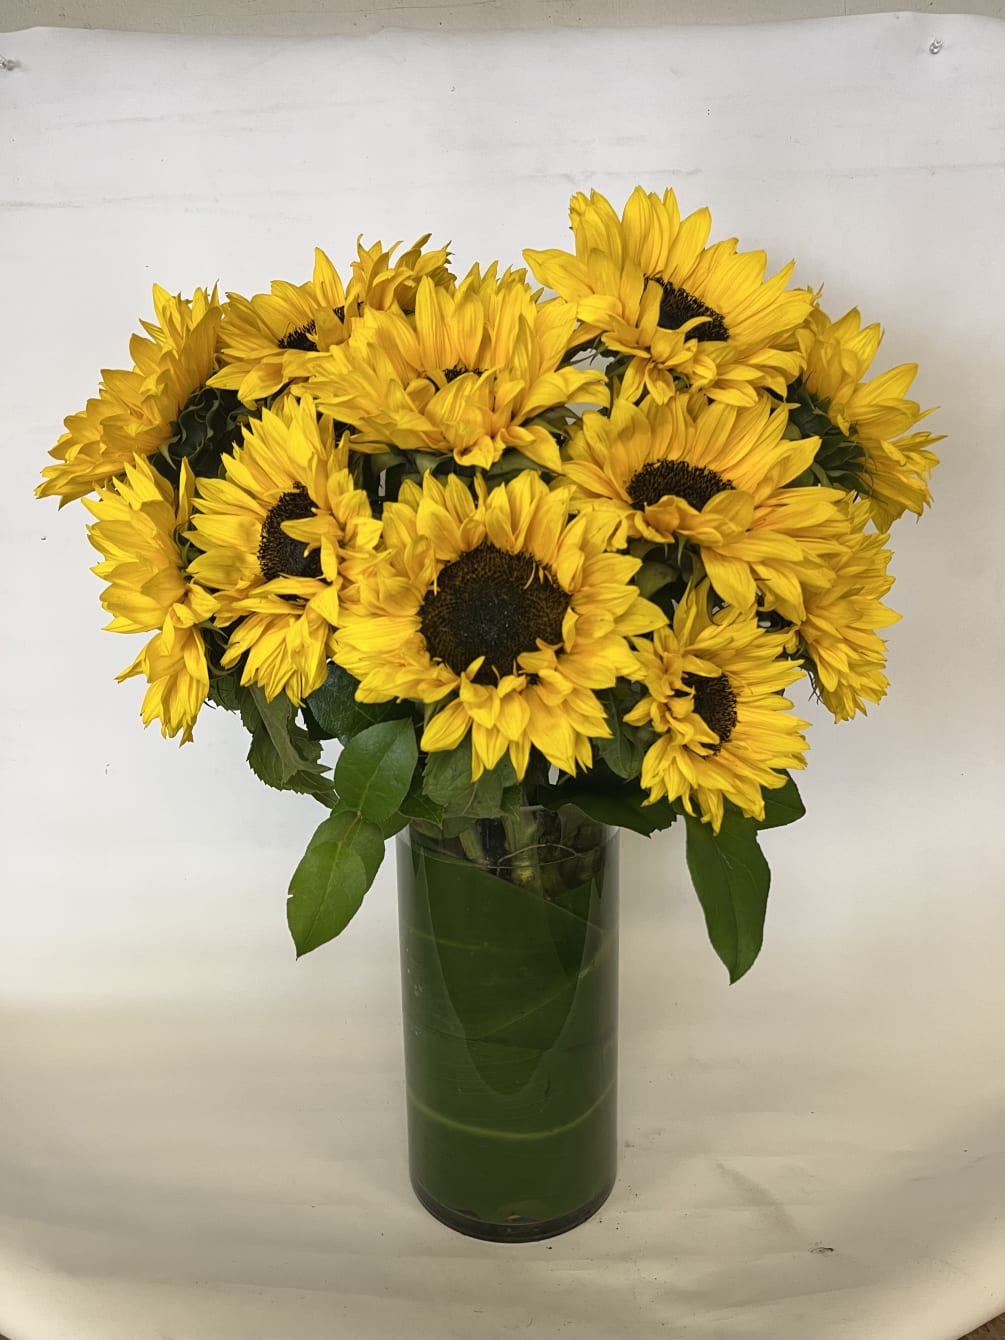 TALL VASE OF SUNFLOWERS WRAPPED IN GREENERY. 